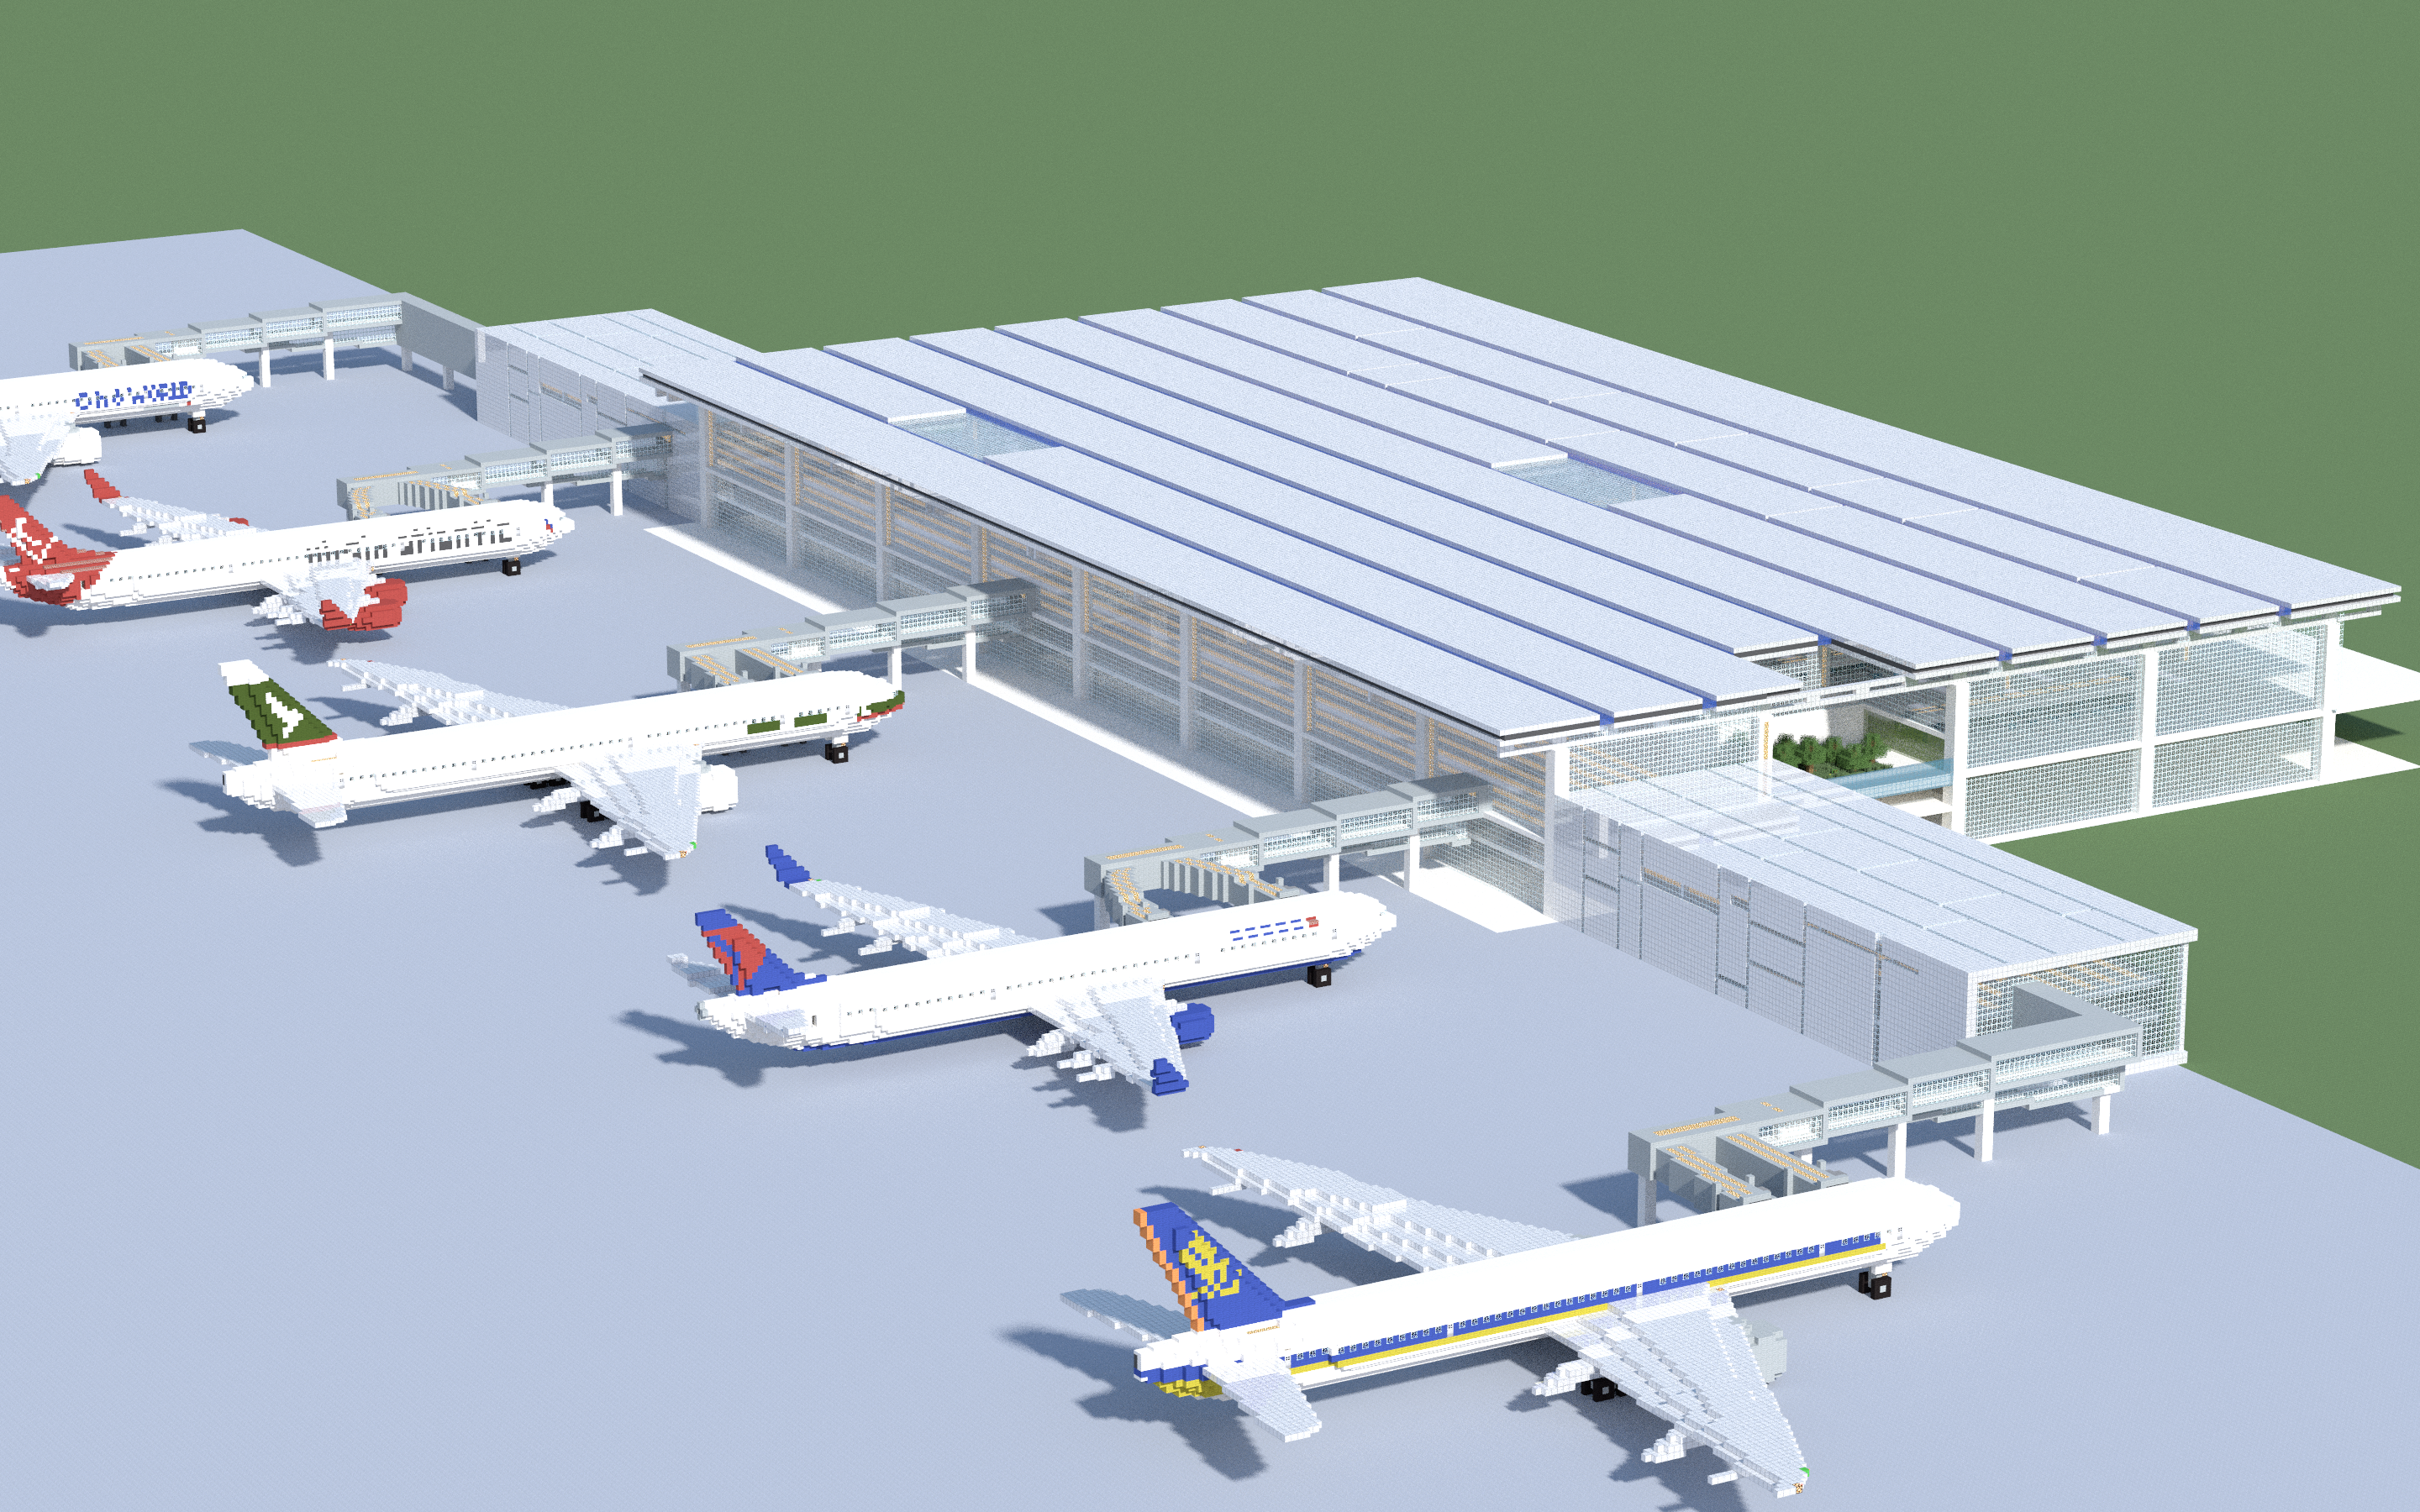 How to build a small airport in minecraft